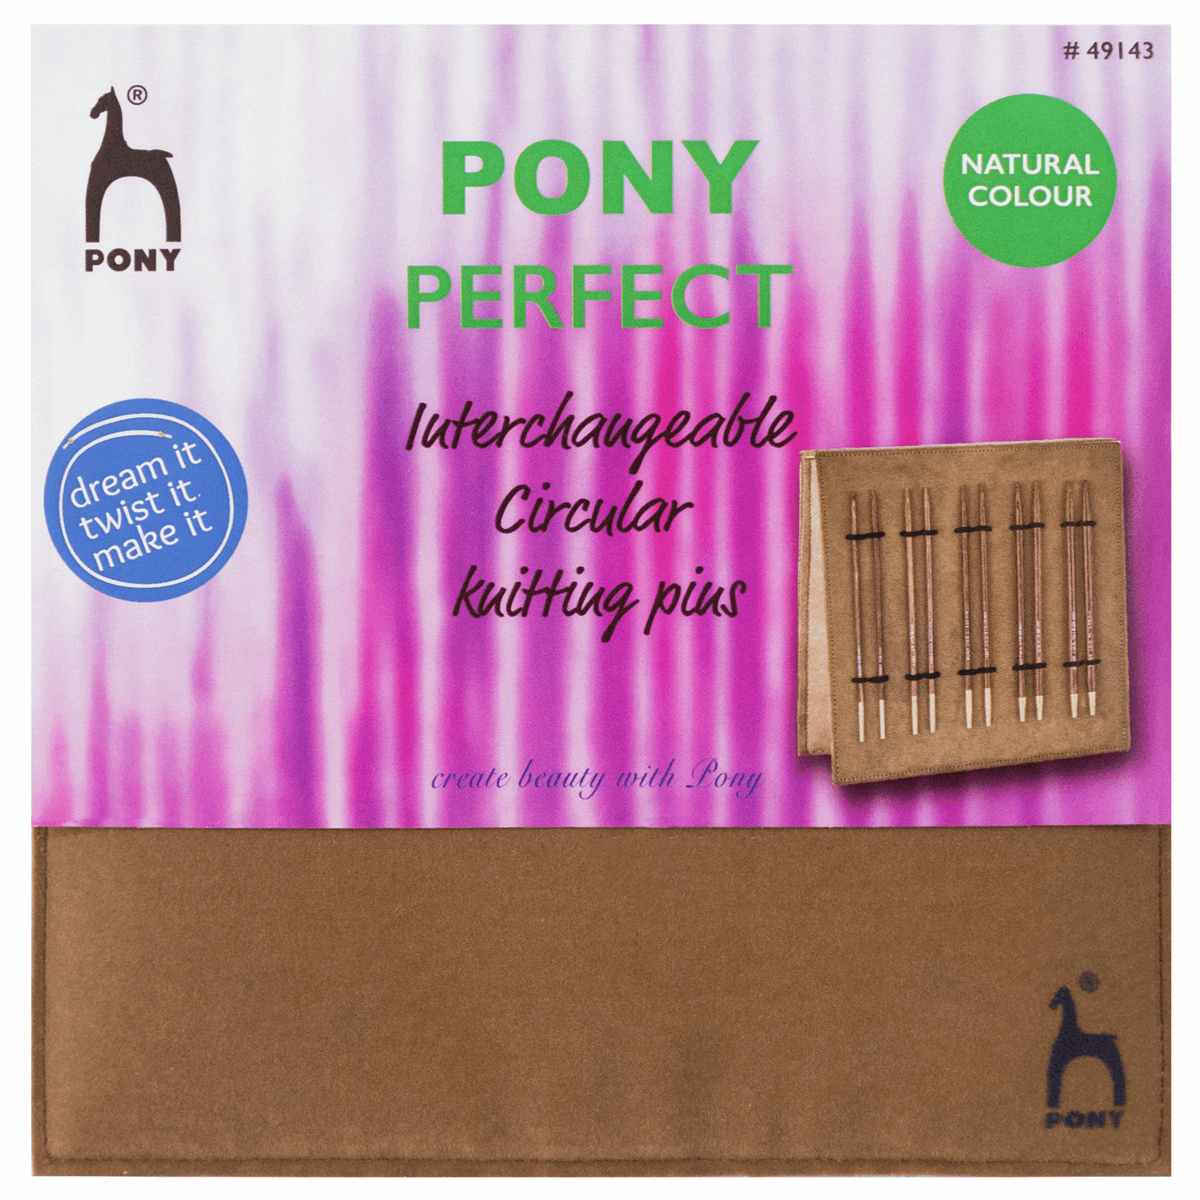 PONY Perfect Interchangeable Circular Knitting Pins - Luxury Gift Case